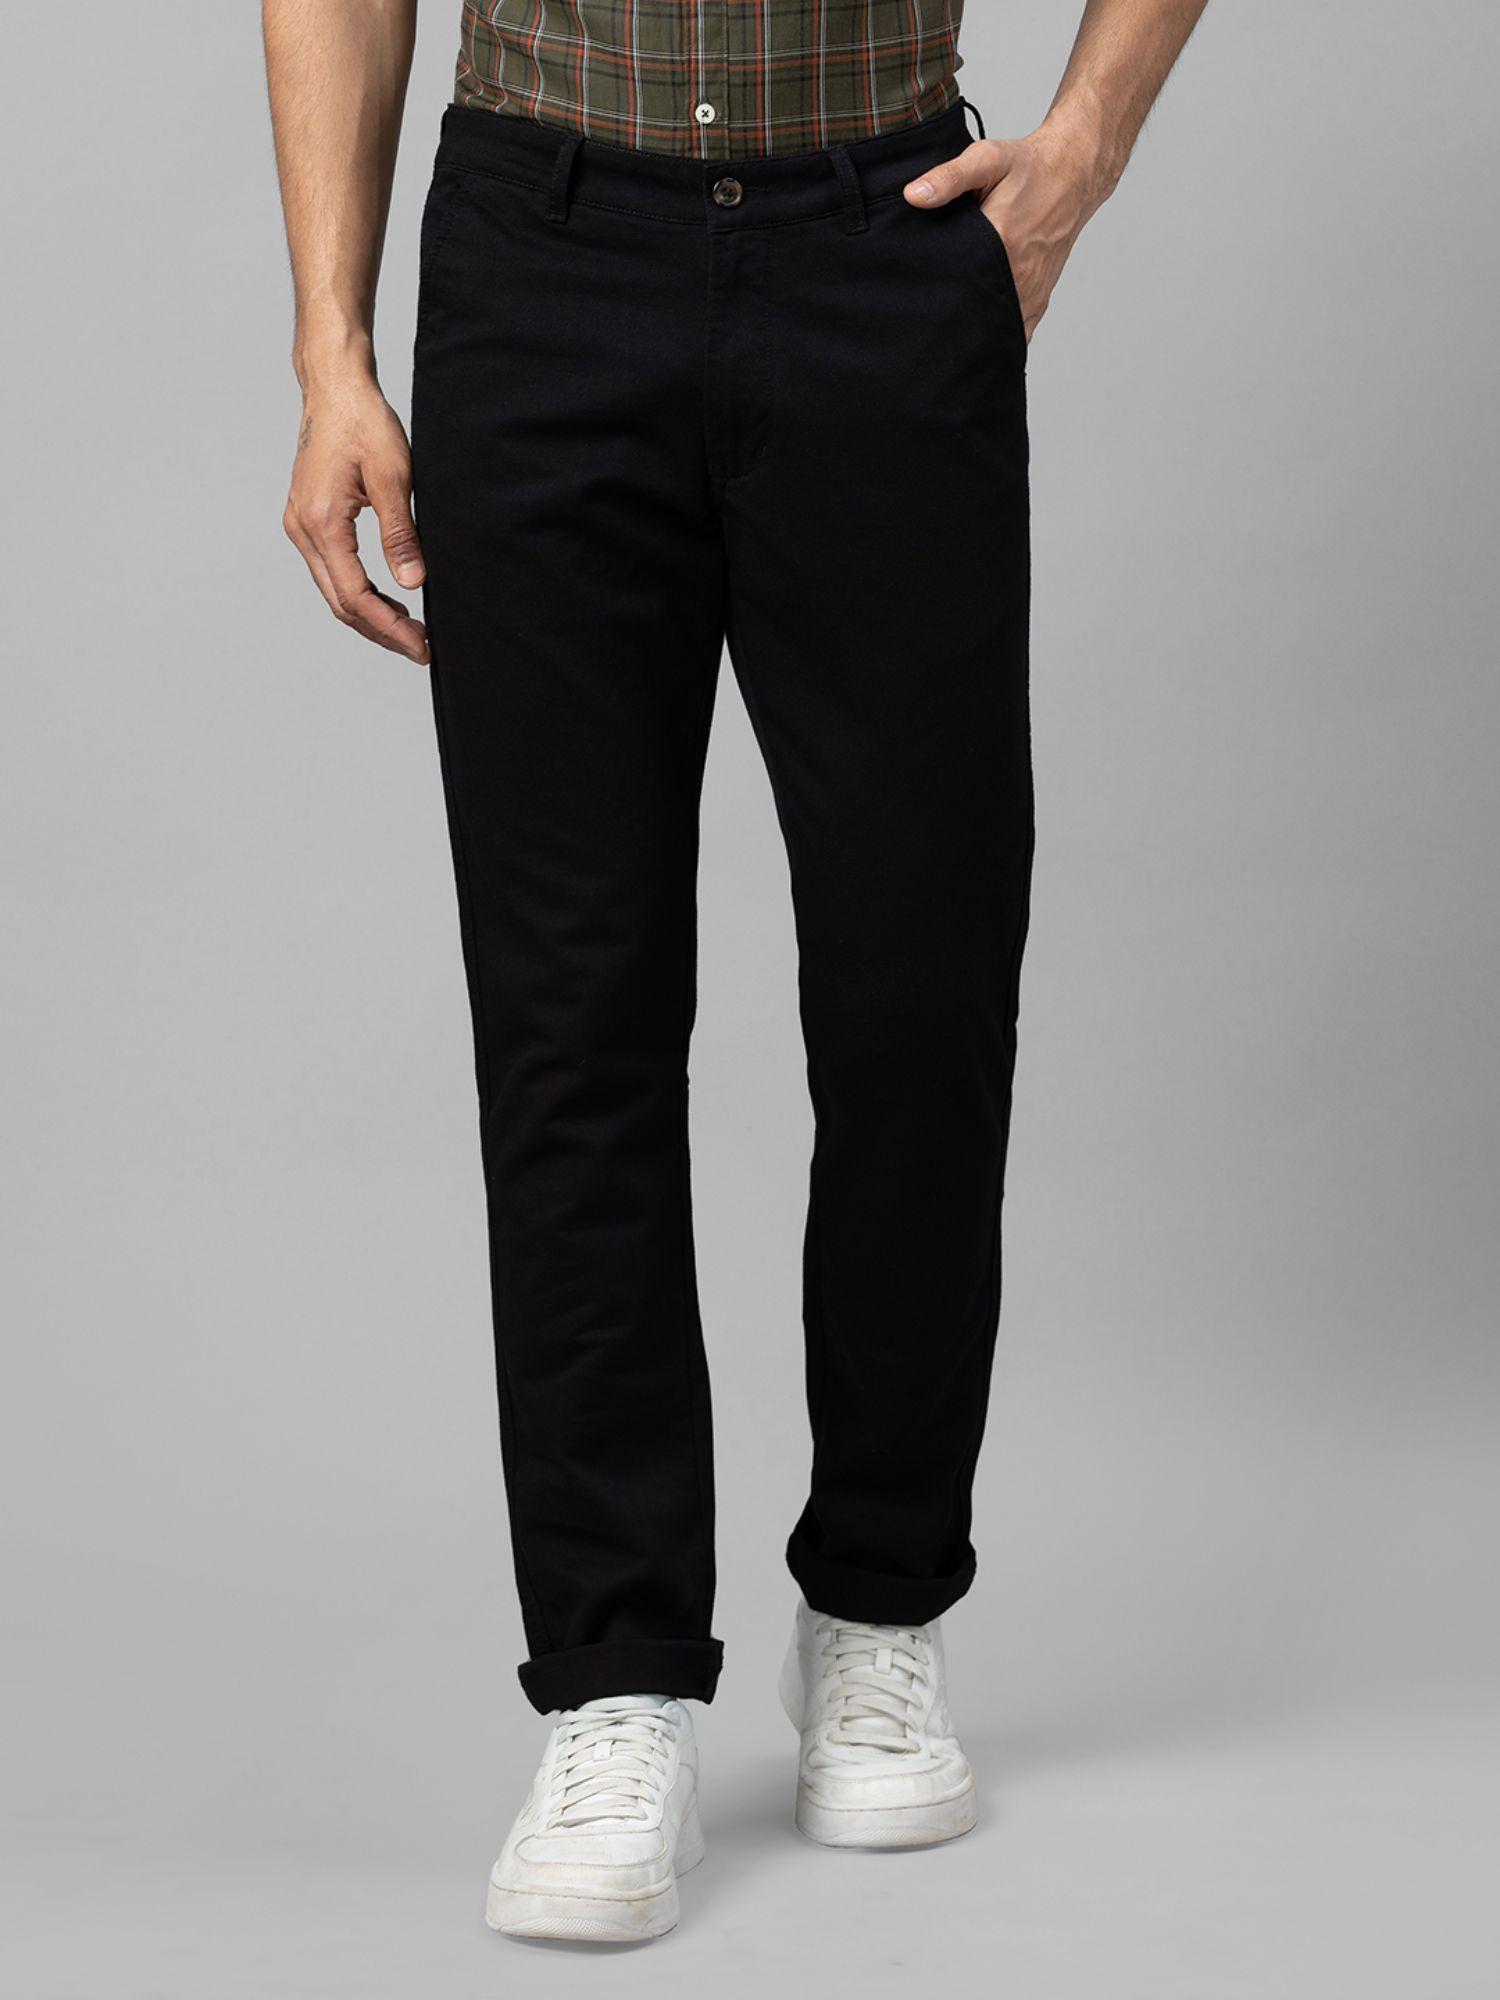 black solid slim fit casual chinos